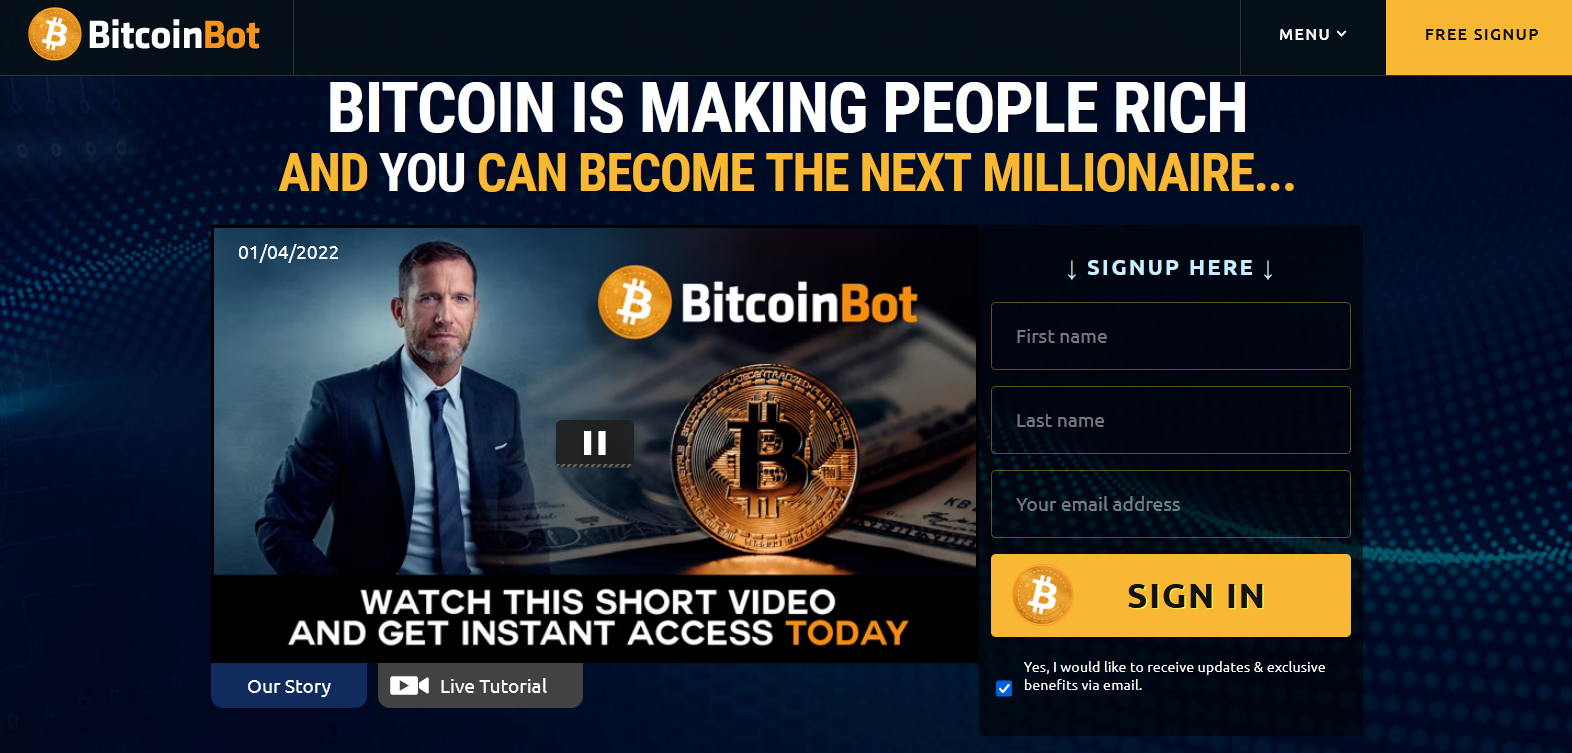 Bitcoin Bot App Review【2022 】 | Read This Before SignUp!